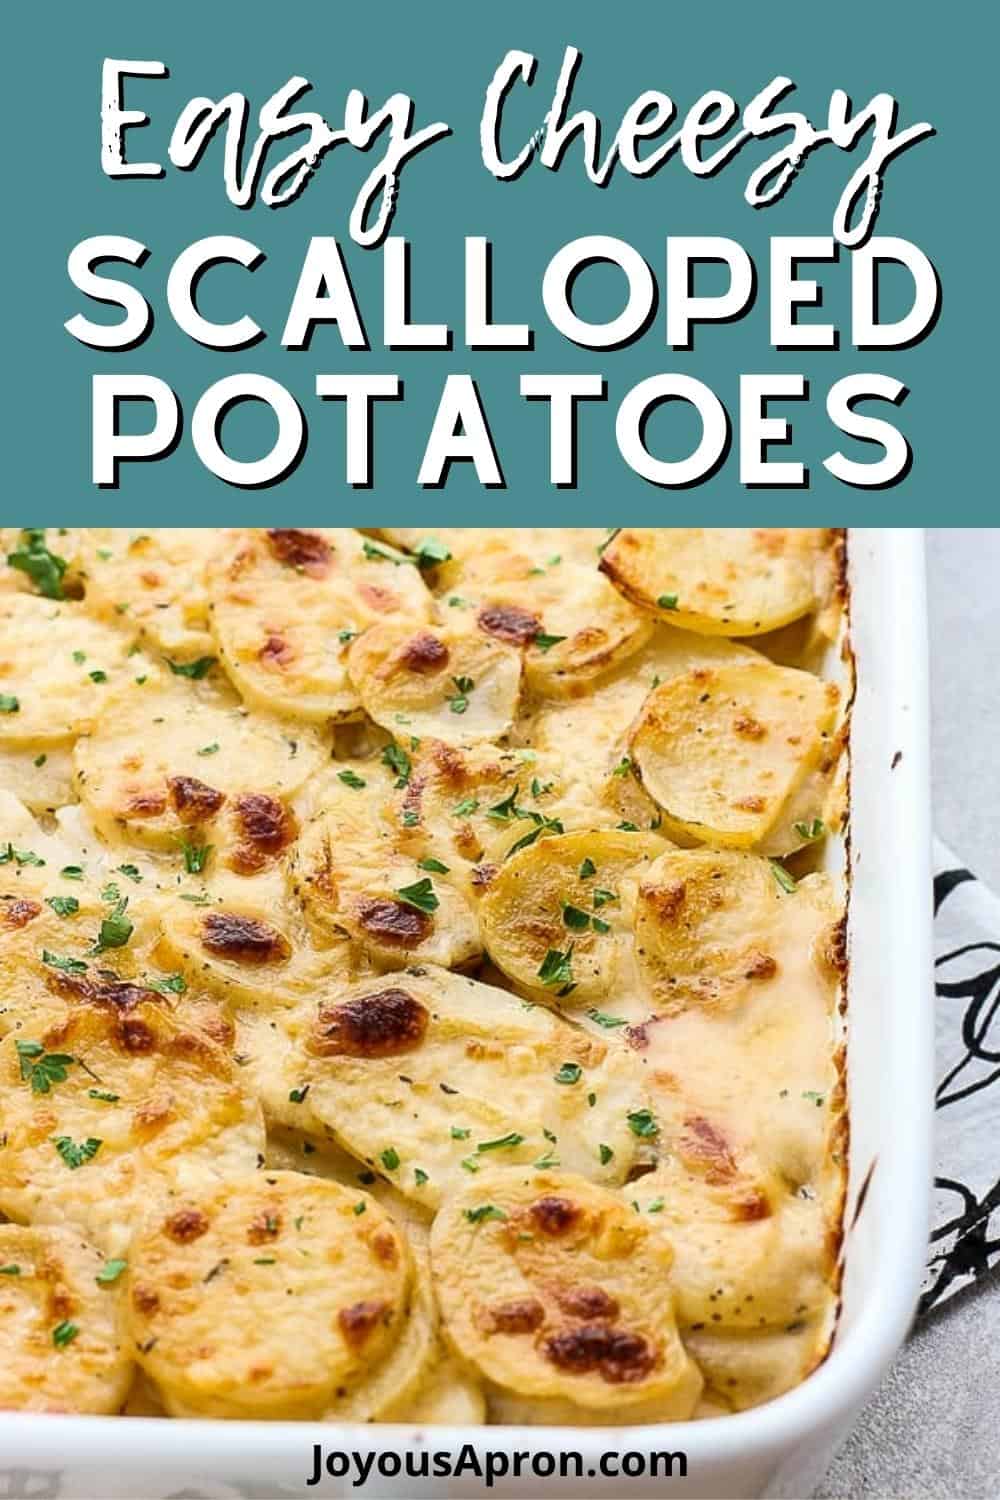 Cheesy Garlic Scalloped Potatoes - A great easy side dish for the holidays or any day! Tender and soft sliced potatoes baked to perfection and in a creamy, velvety, garlicky cheese sauce. Comfort food for the soul. via @joyousapron